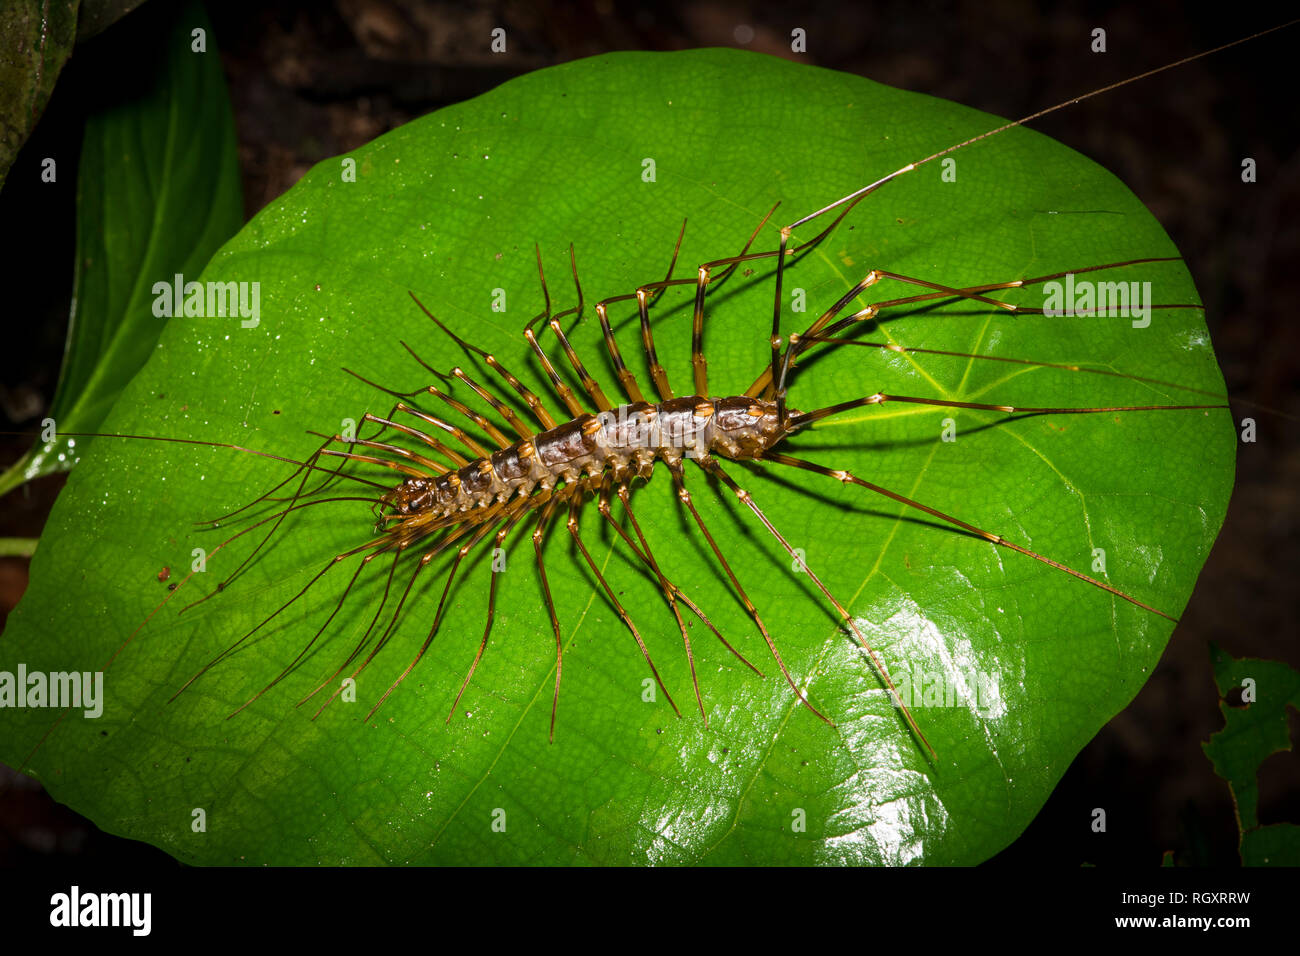 A weird looking bug (cave centipede) on a leaf in Danum Valley Rainforest at night, Sabah, Borneo, Malaysia. Stock Photo